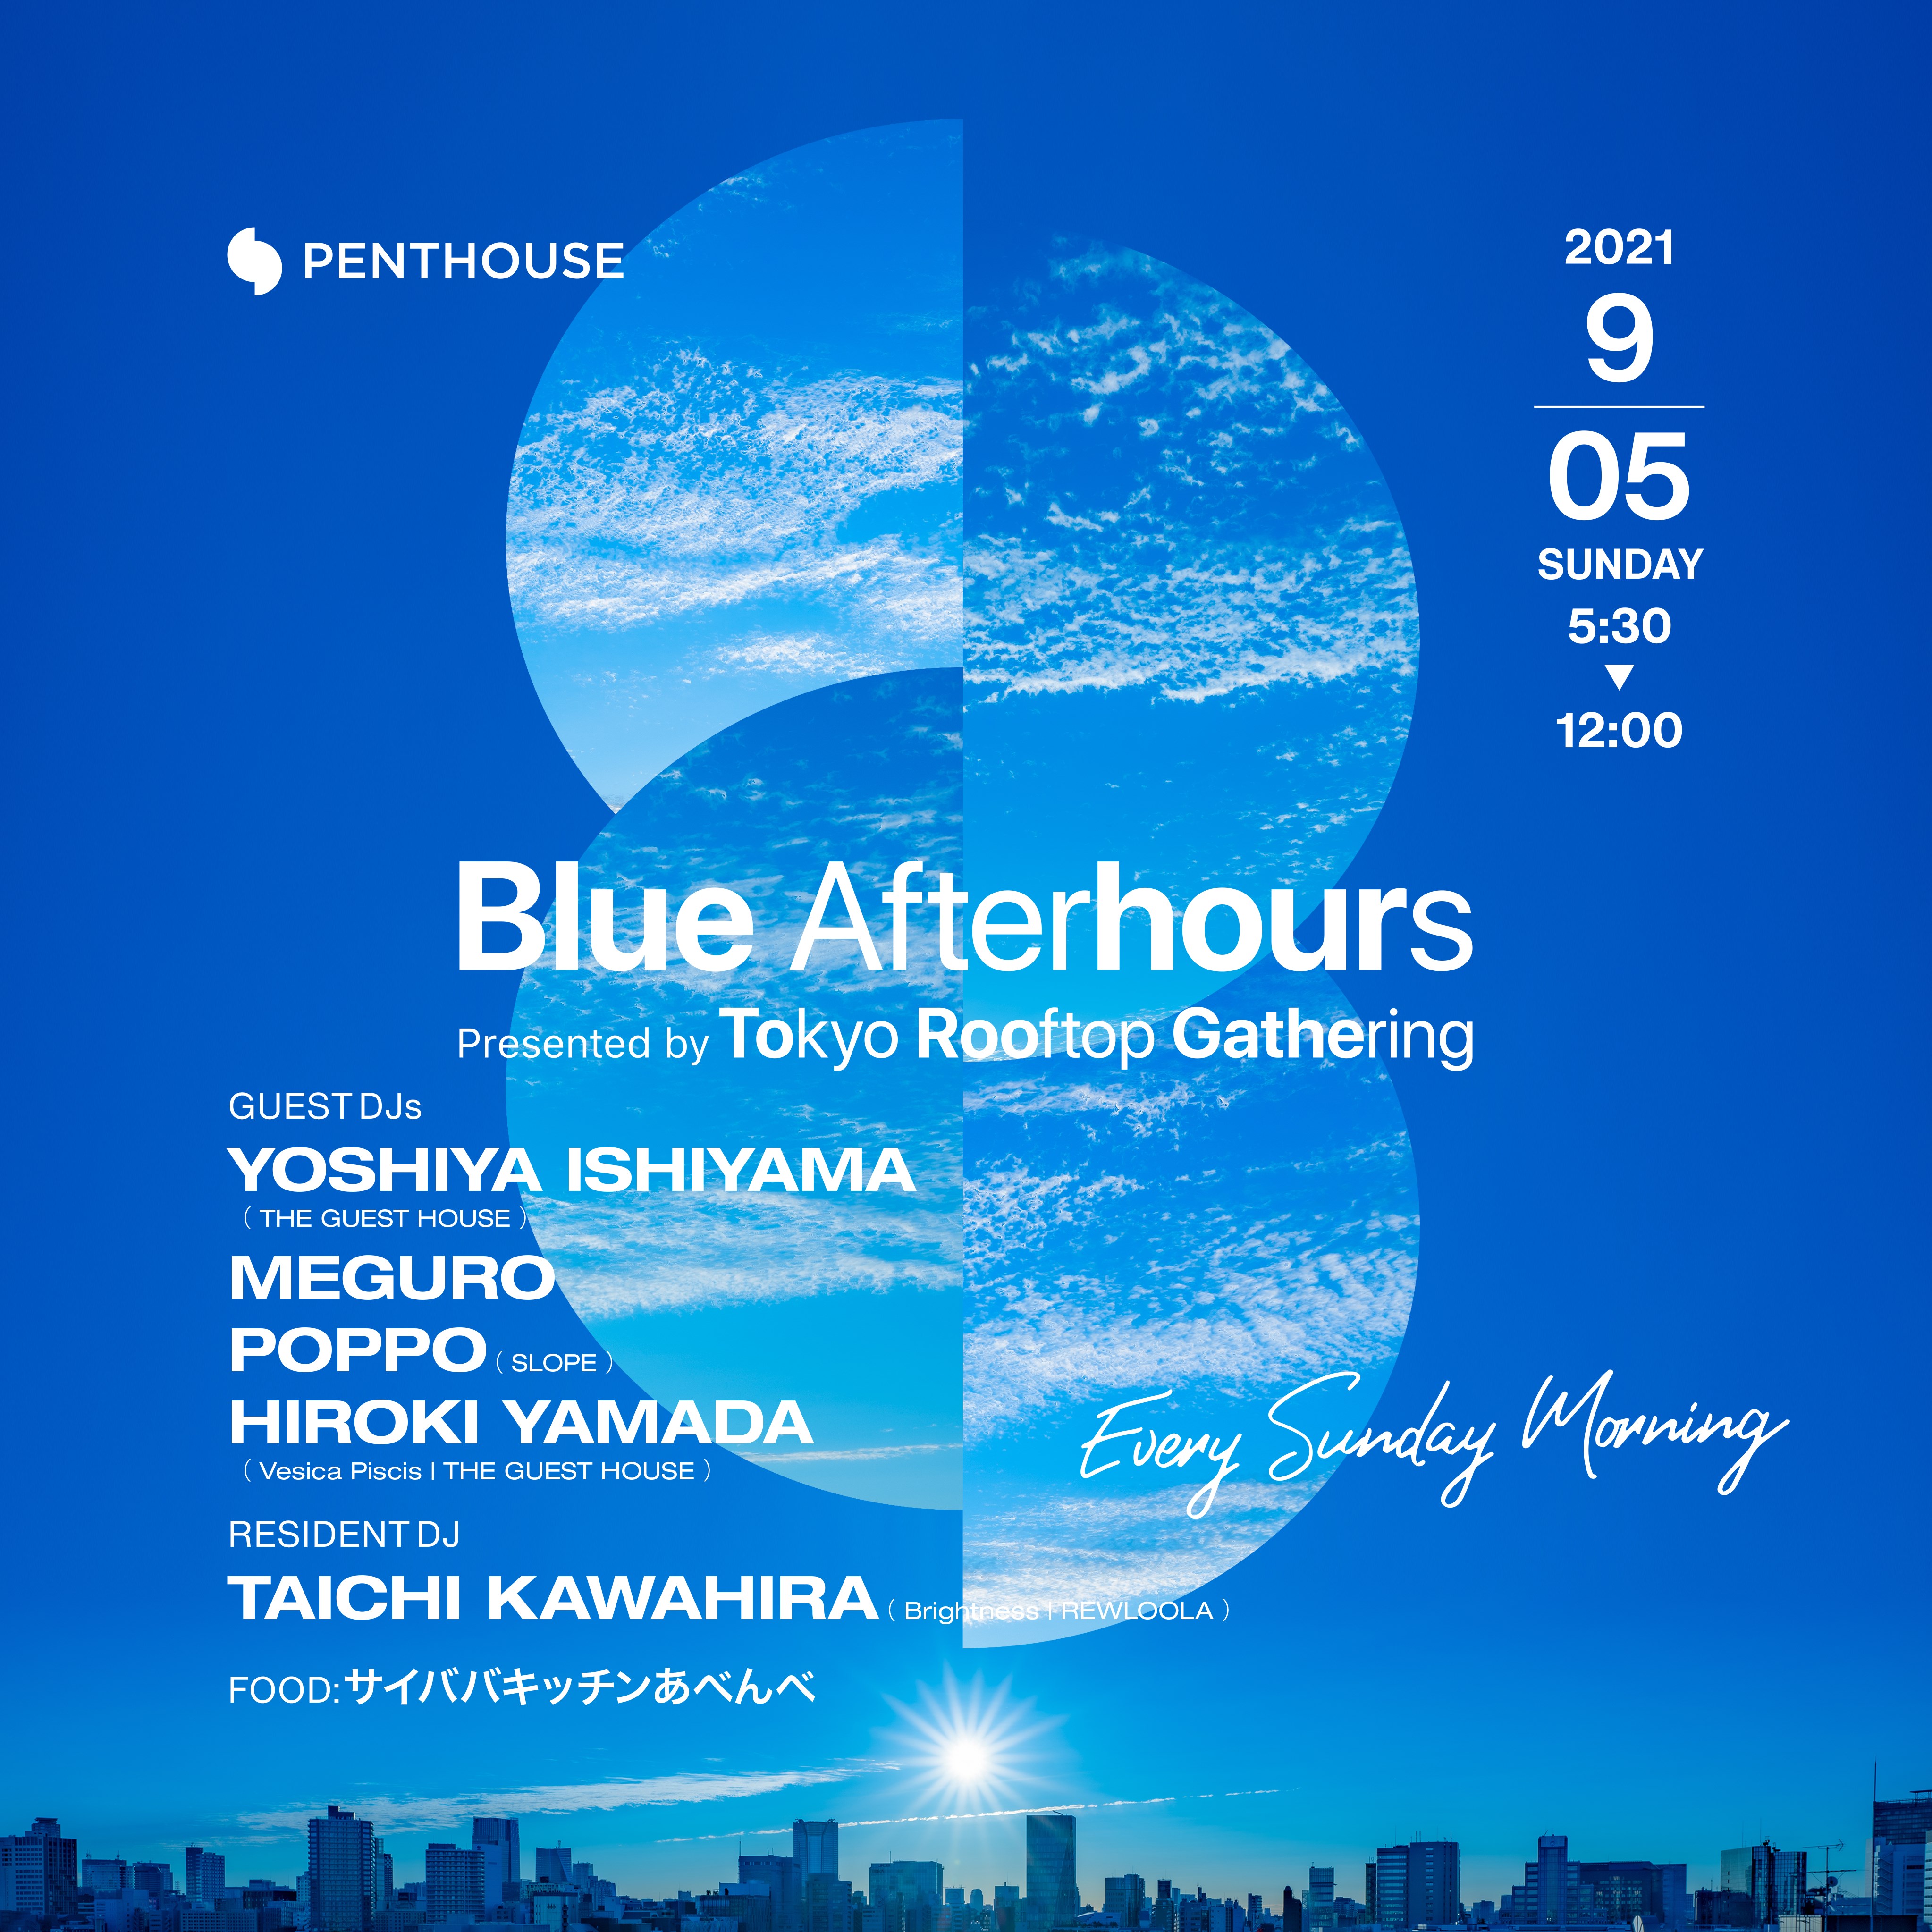 Blue Afterhours -Presented by Tokyo Rooftop Gathering-